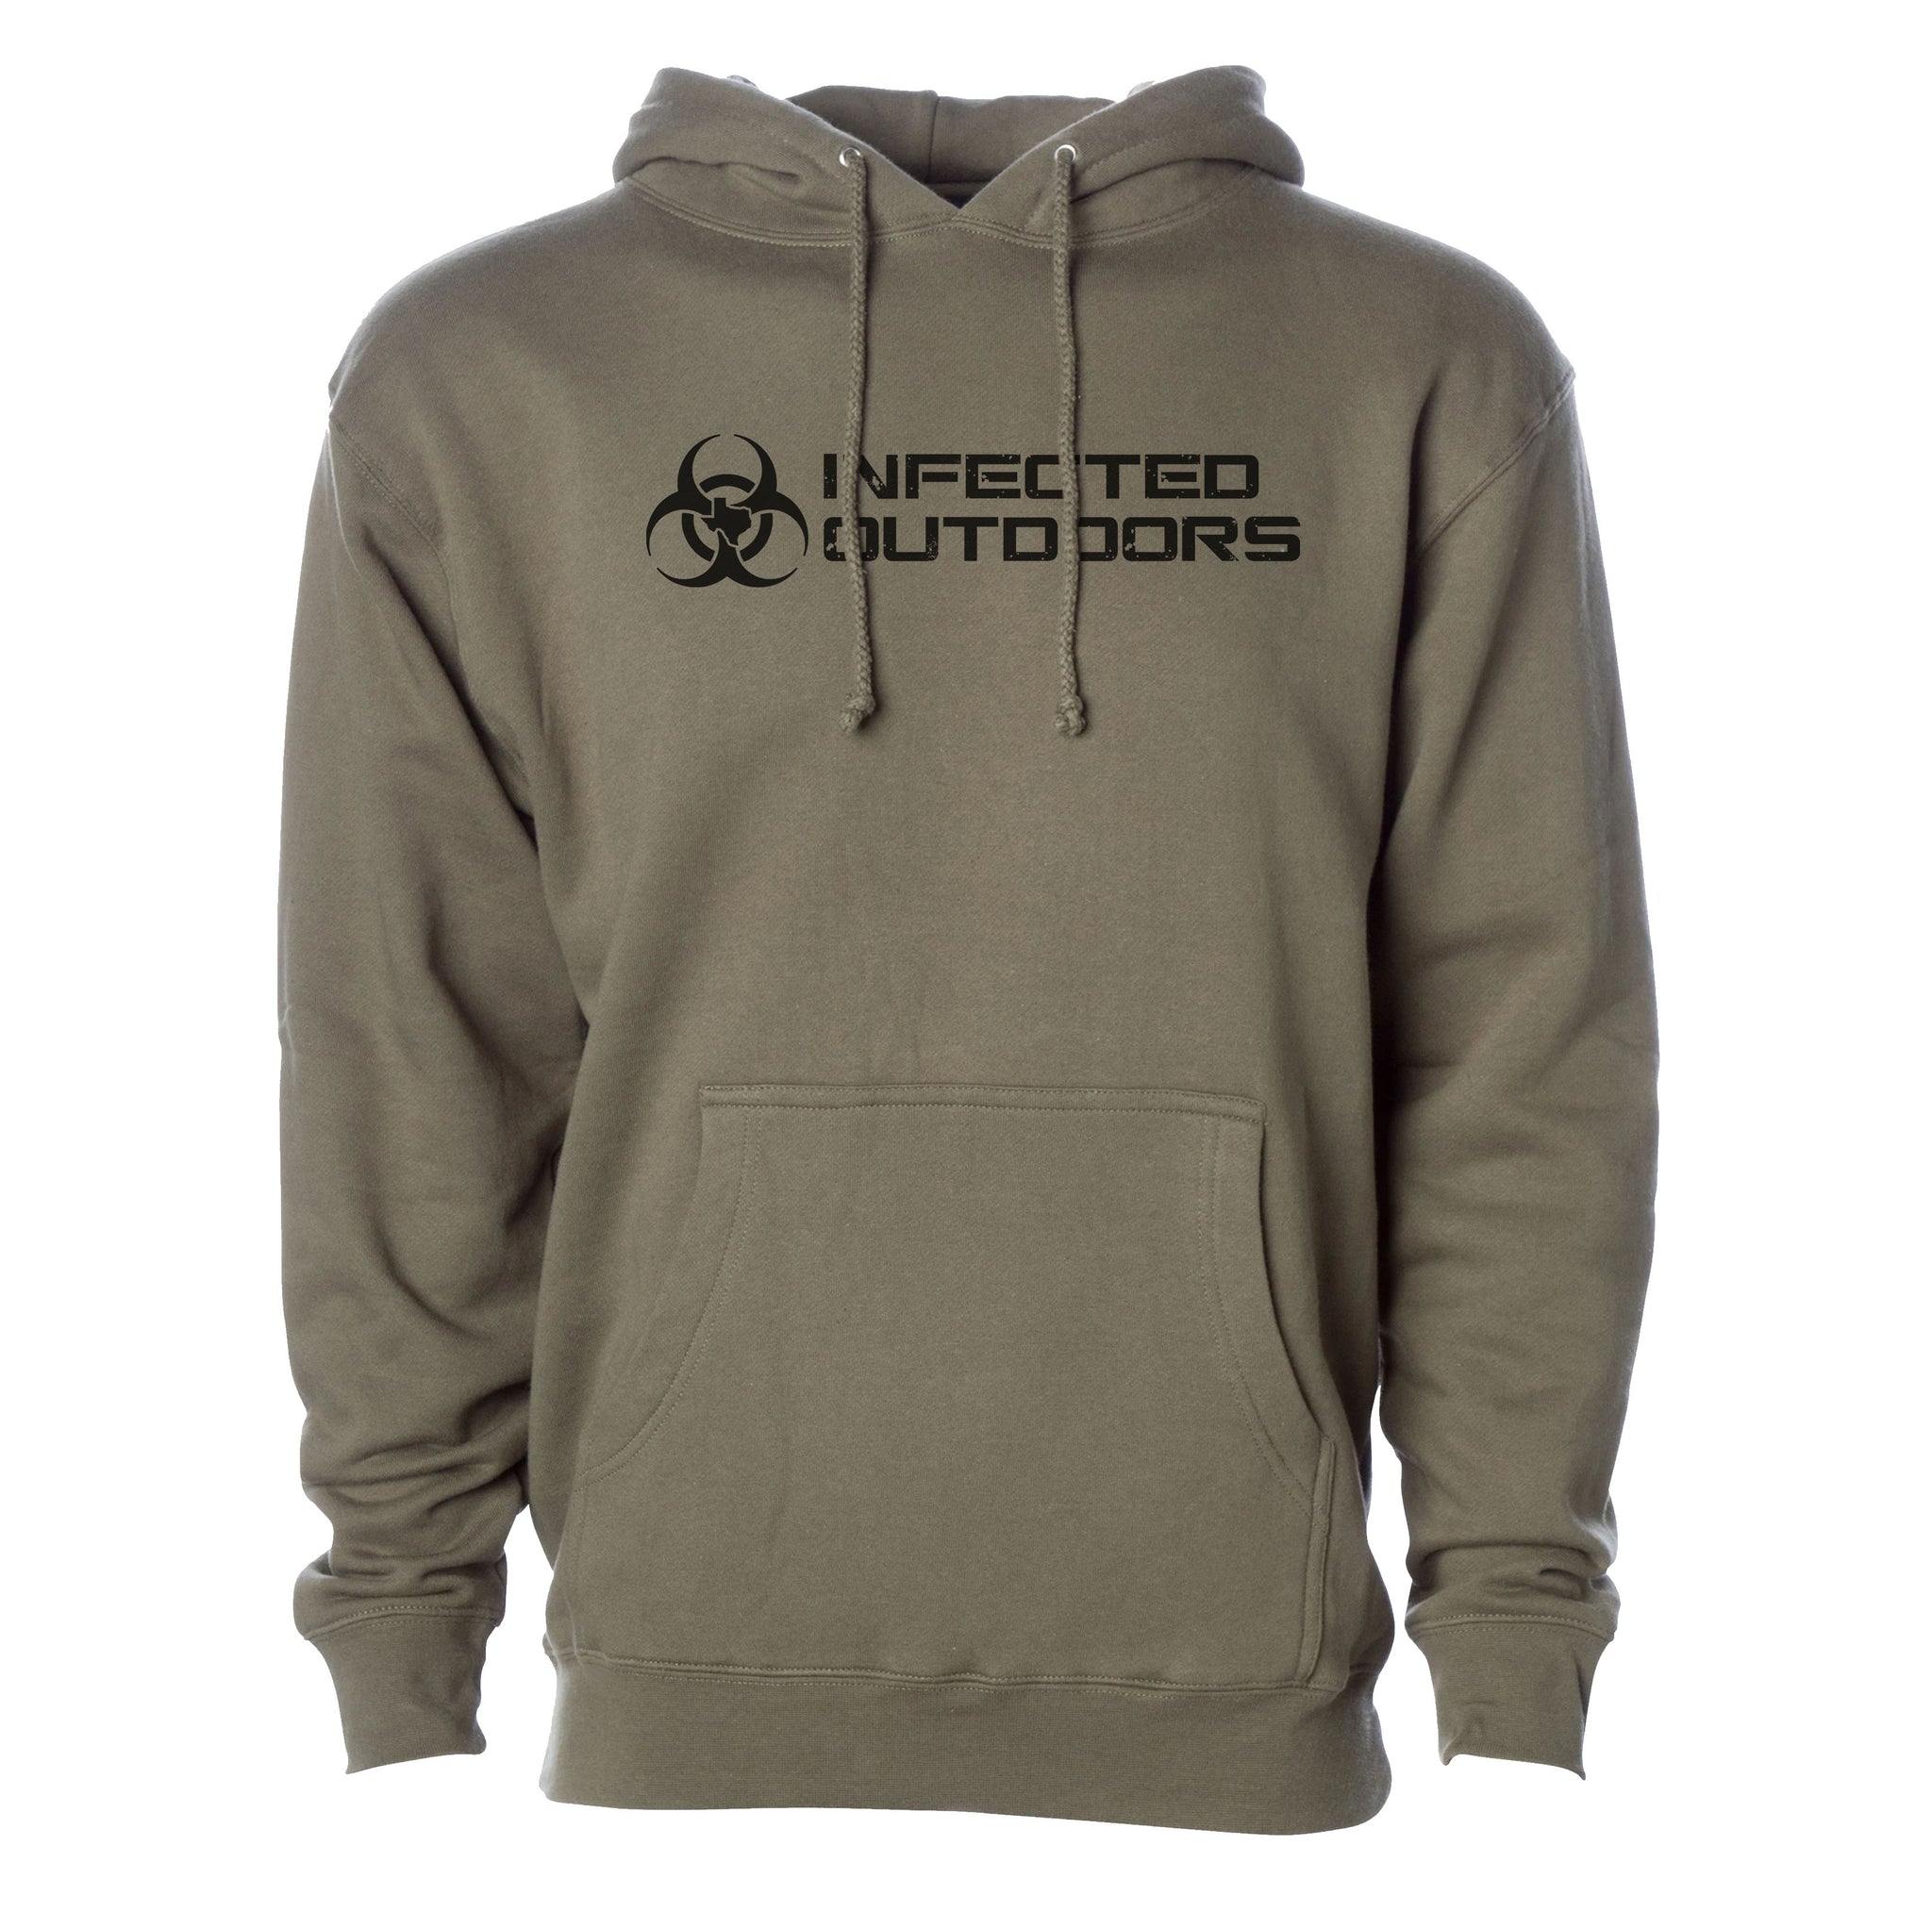 Infected Outdoors Classic Logo Hoodie